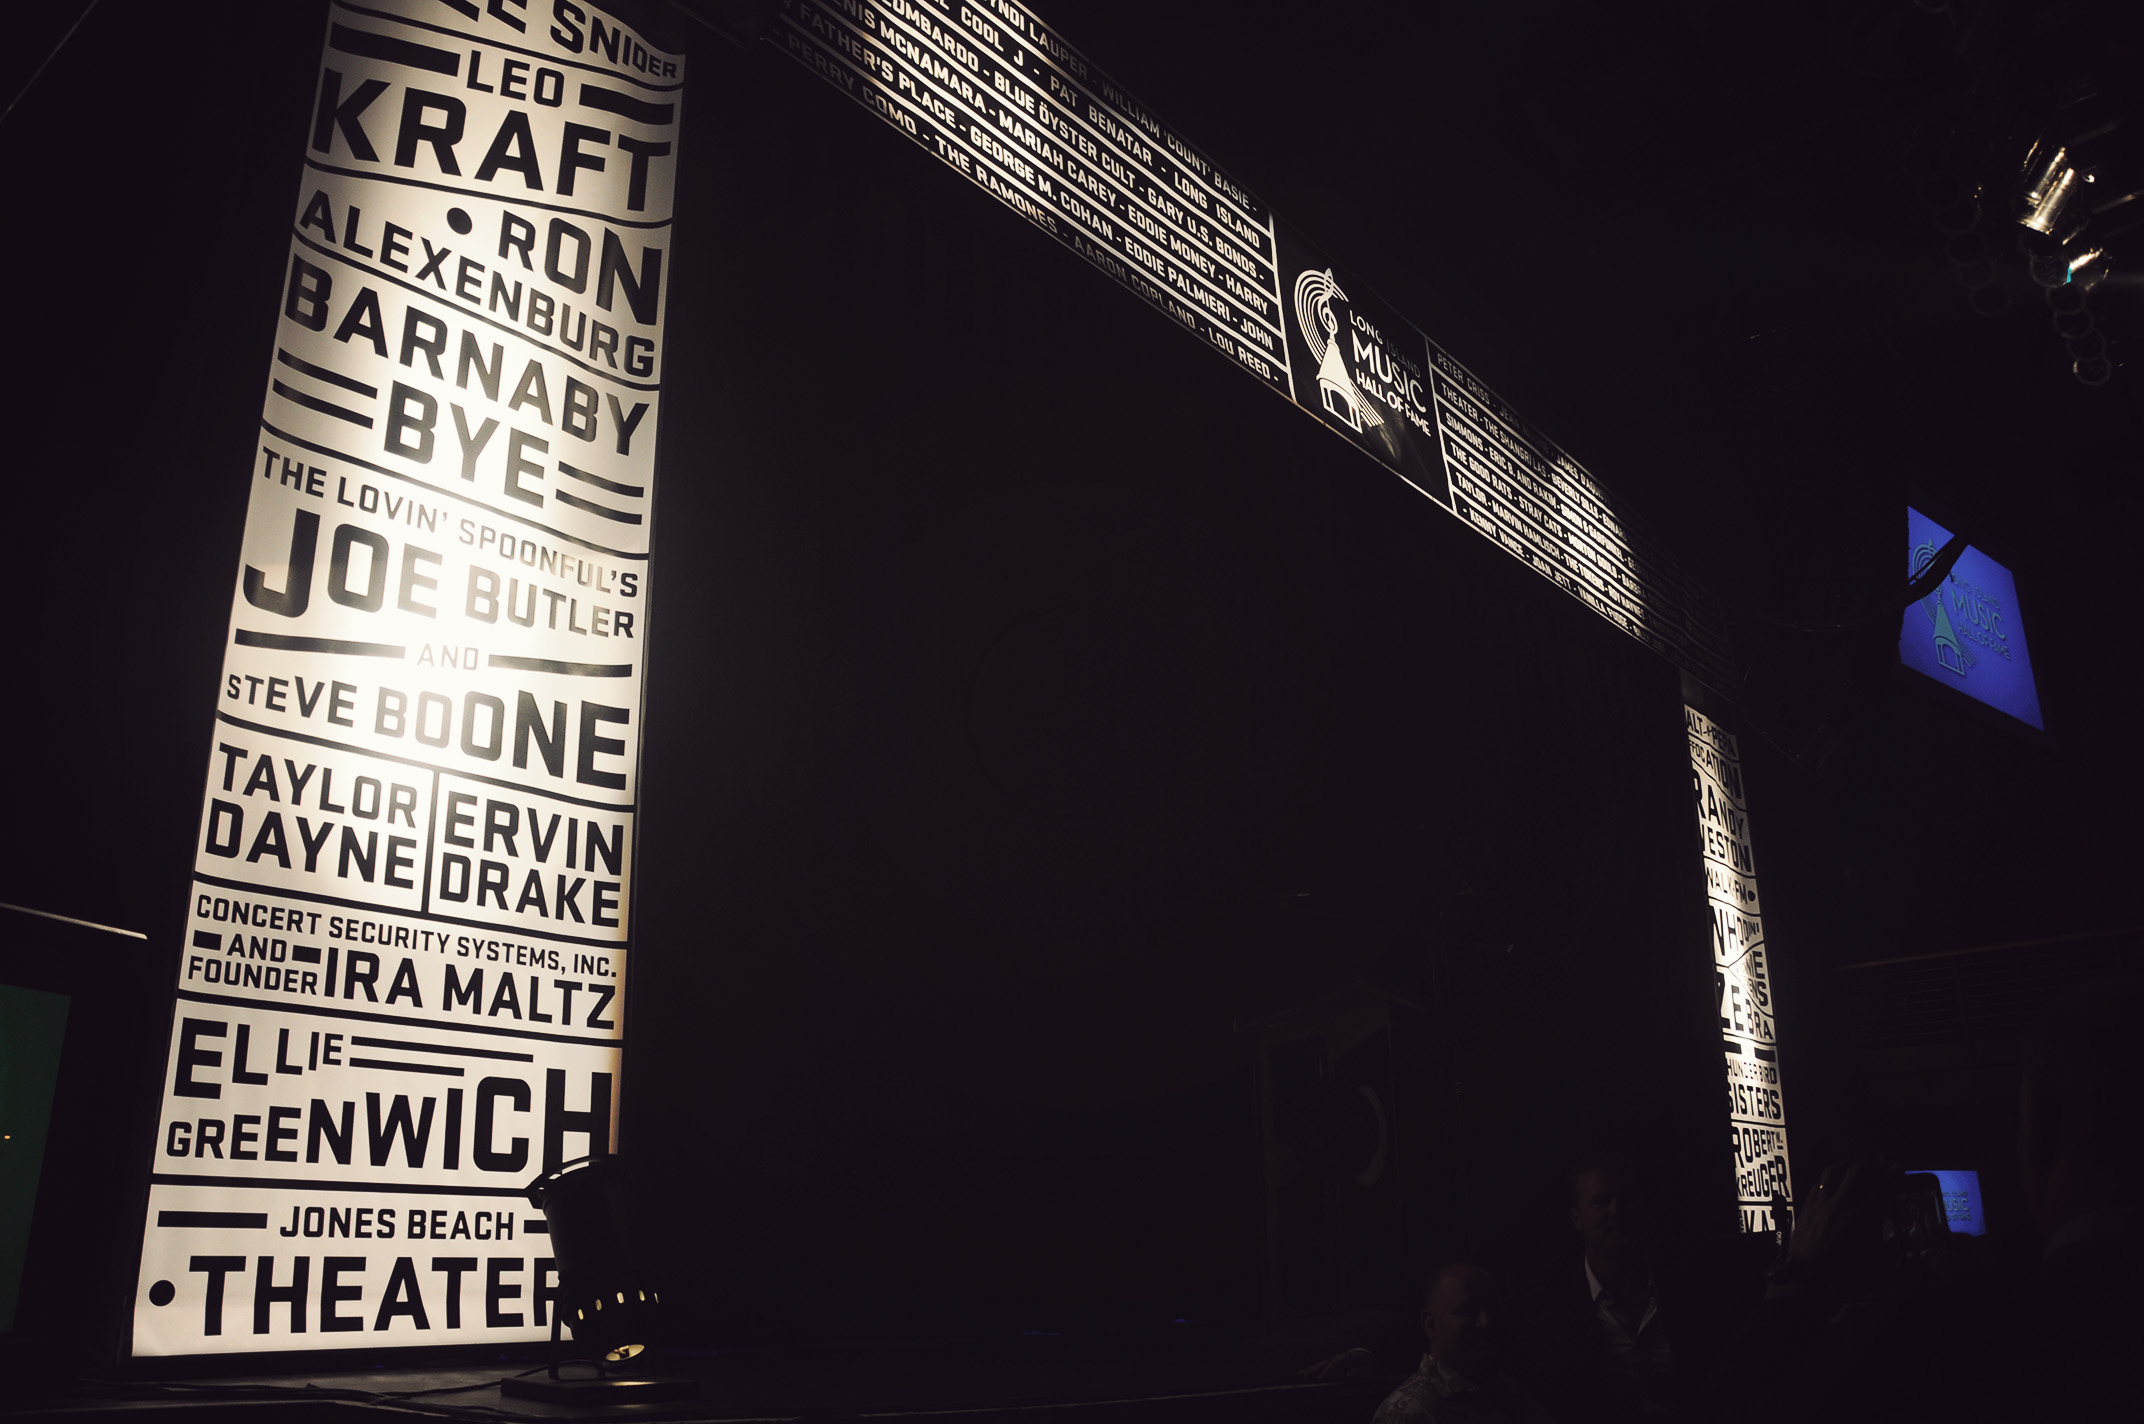 A photo of a stage with illuminated margins that look like newspaper clippings.